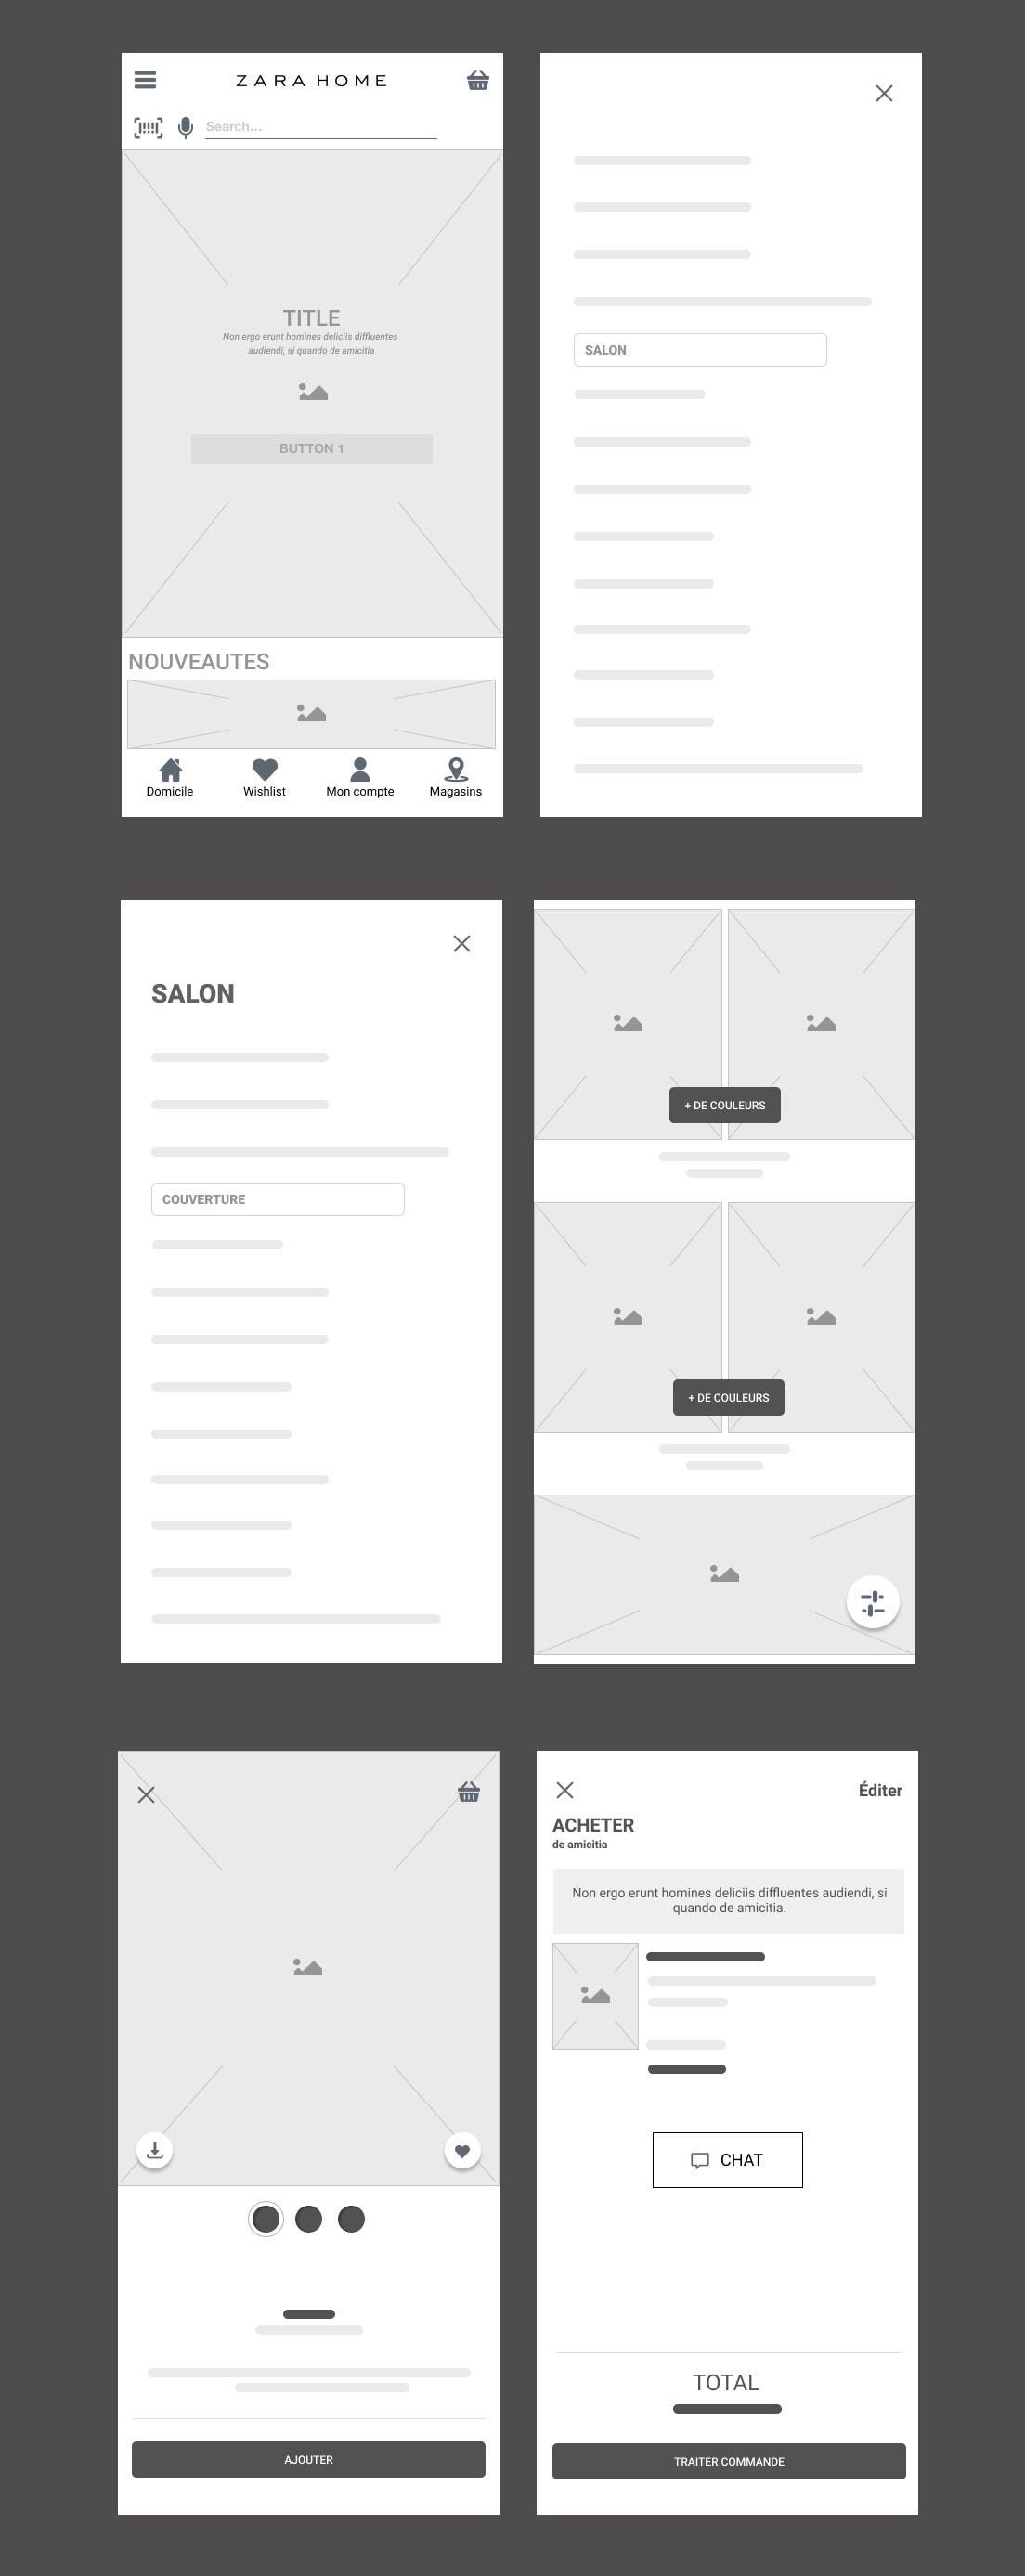 WIREFRAMING : Zara Home APP. Wireframes give a simple visual… | by Rose  Diquero | Medium